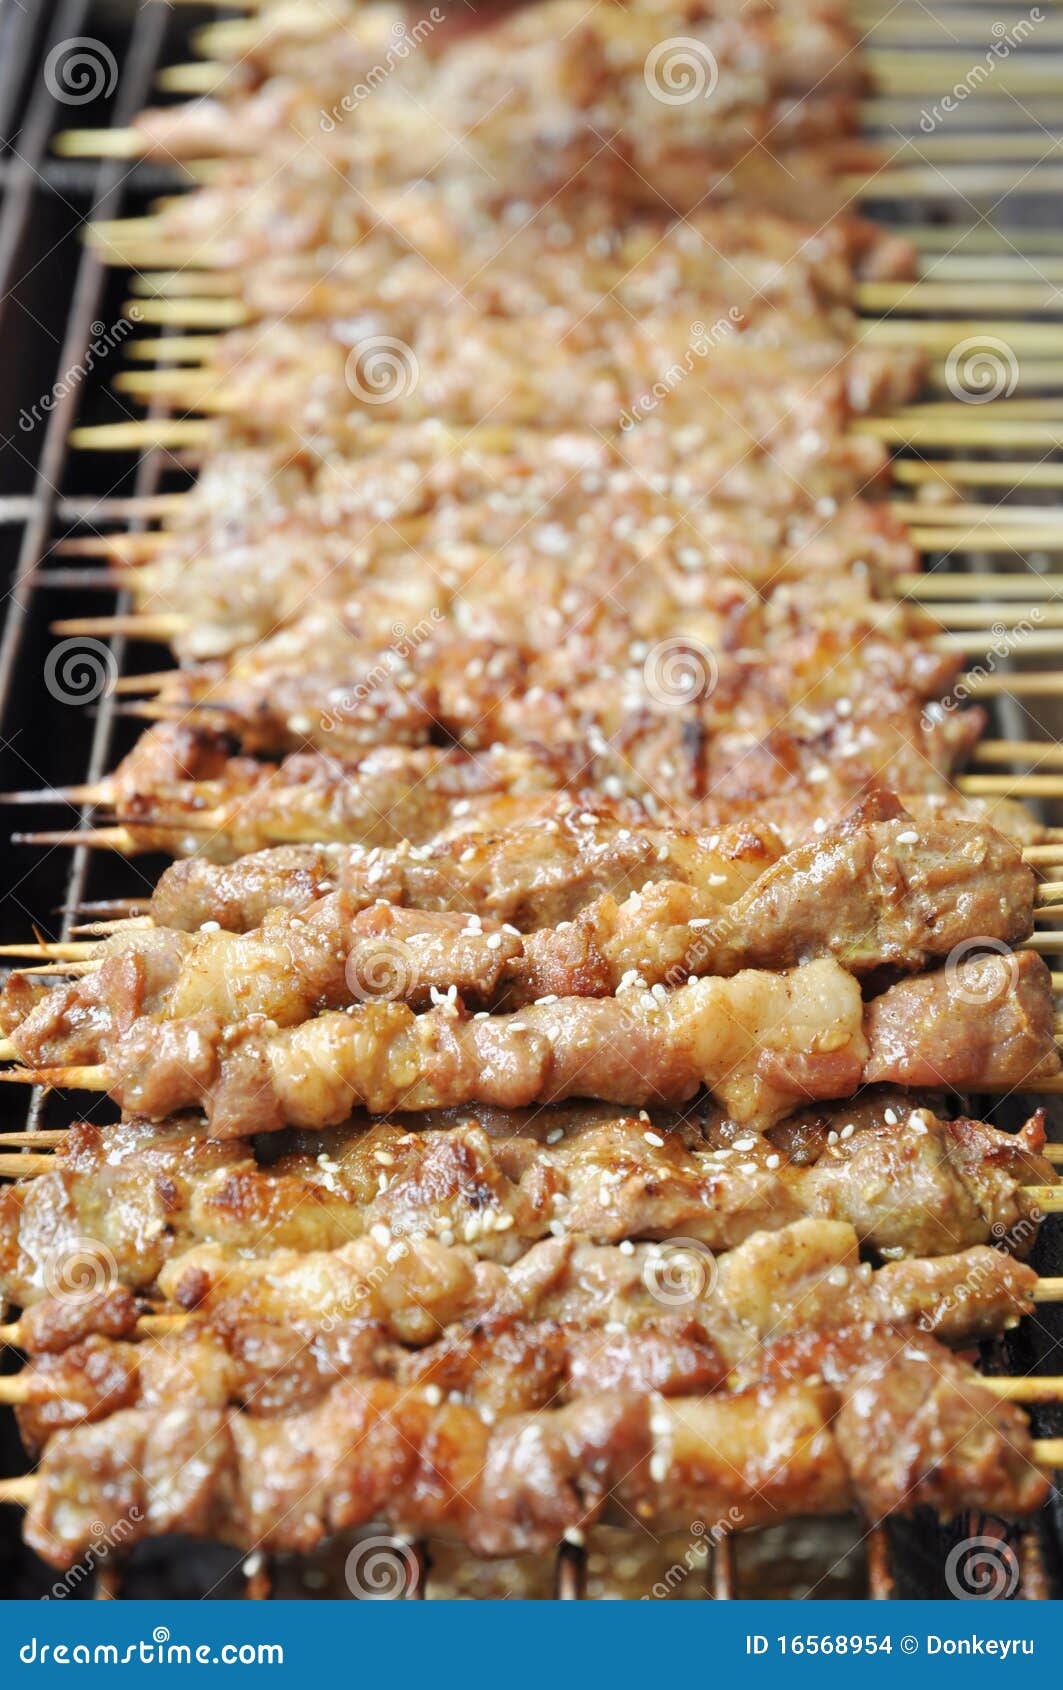 barbecue on skewer